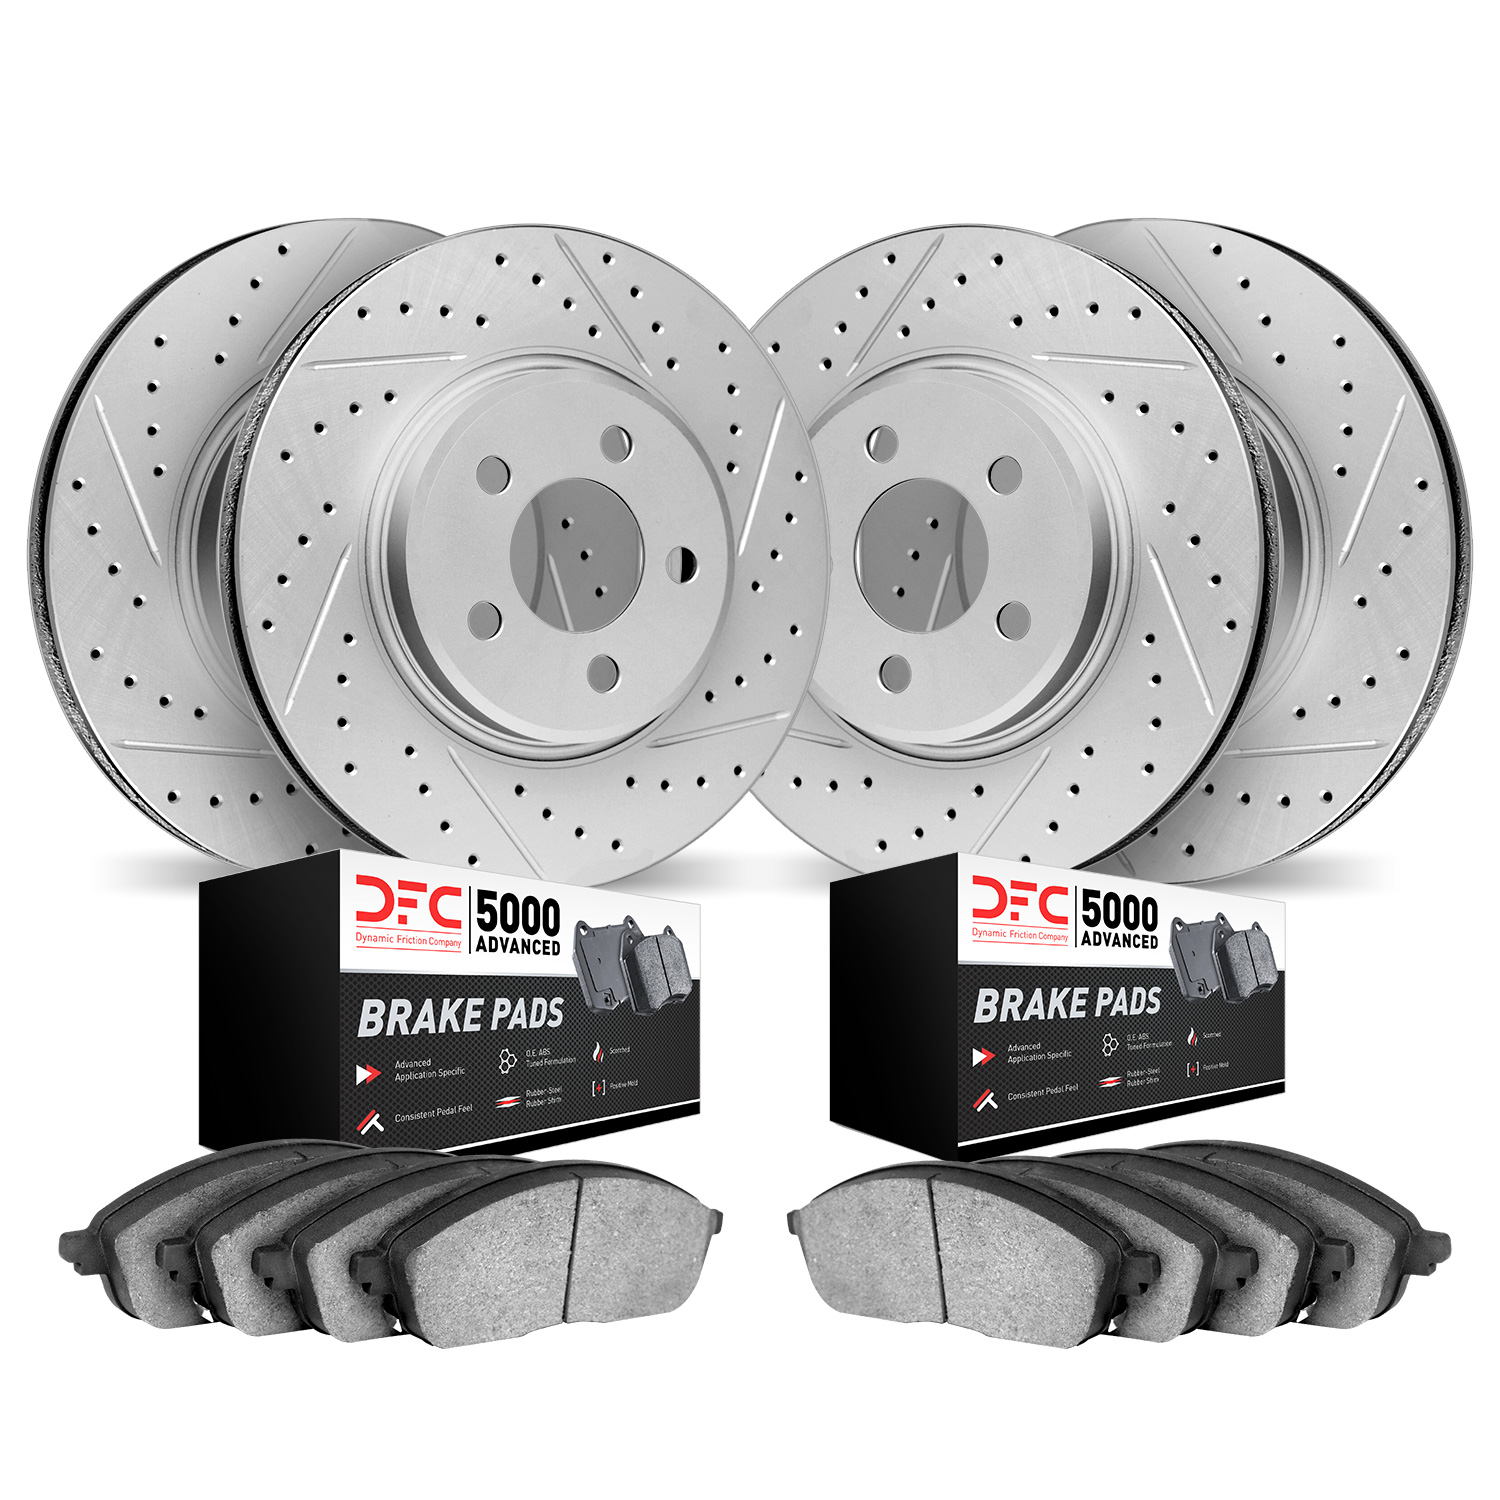 2504-47259 Geoperformance Drilled/Slotted Rotors w/5000 Advanced Brake Pads Kit, 1963-1982 GM, Position: Front and Rear